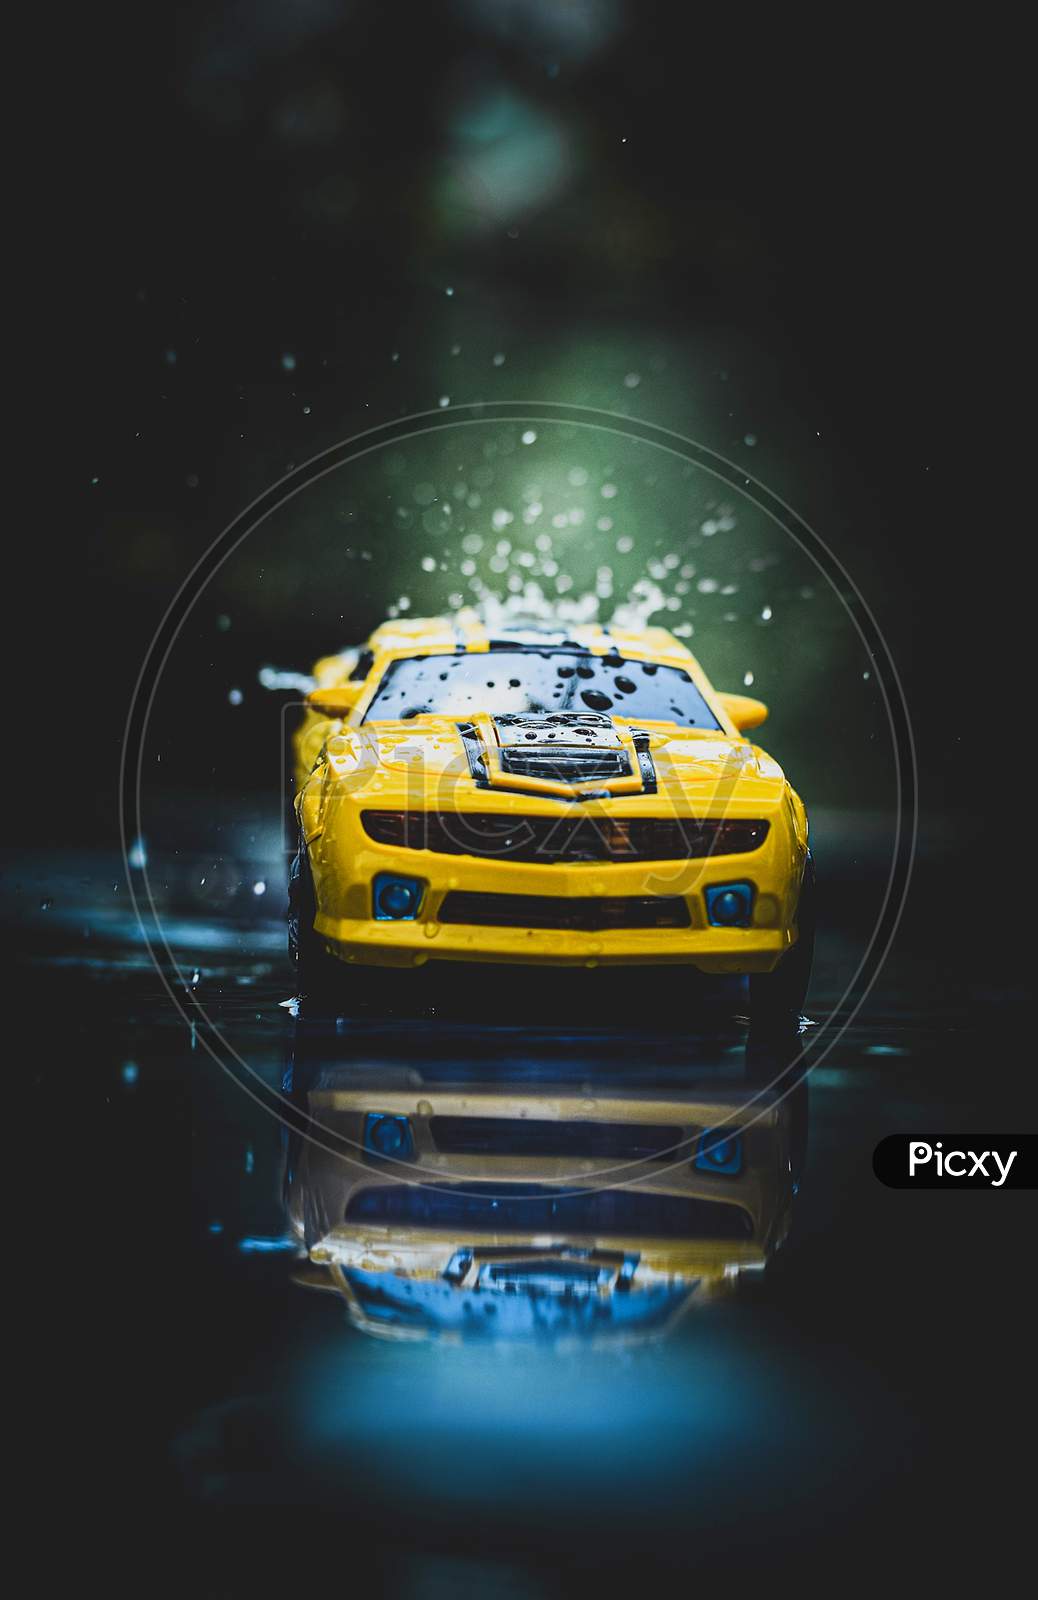 Car photography and water drop lets